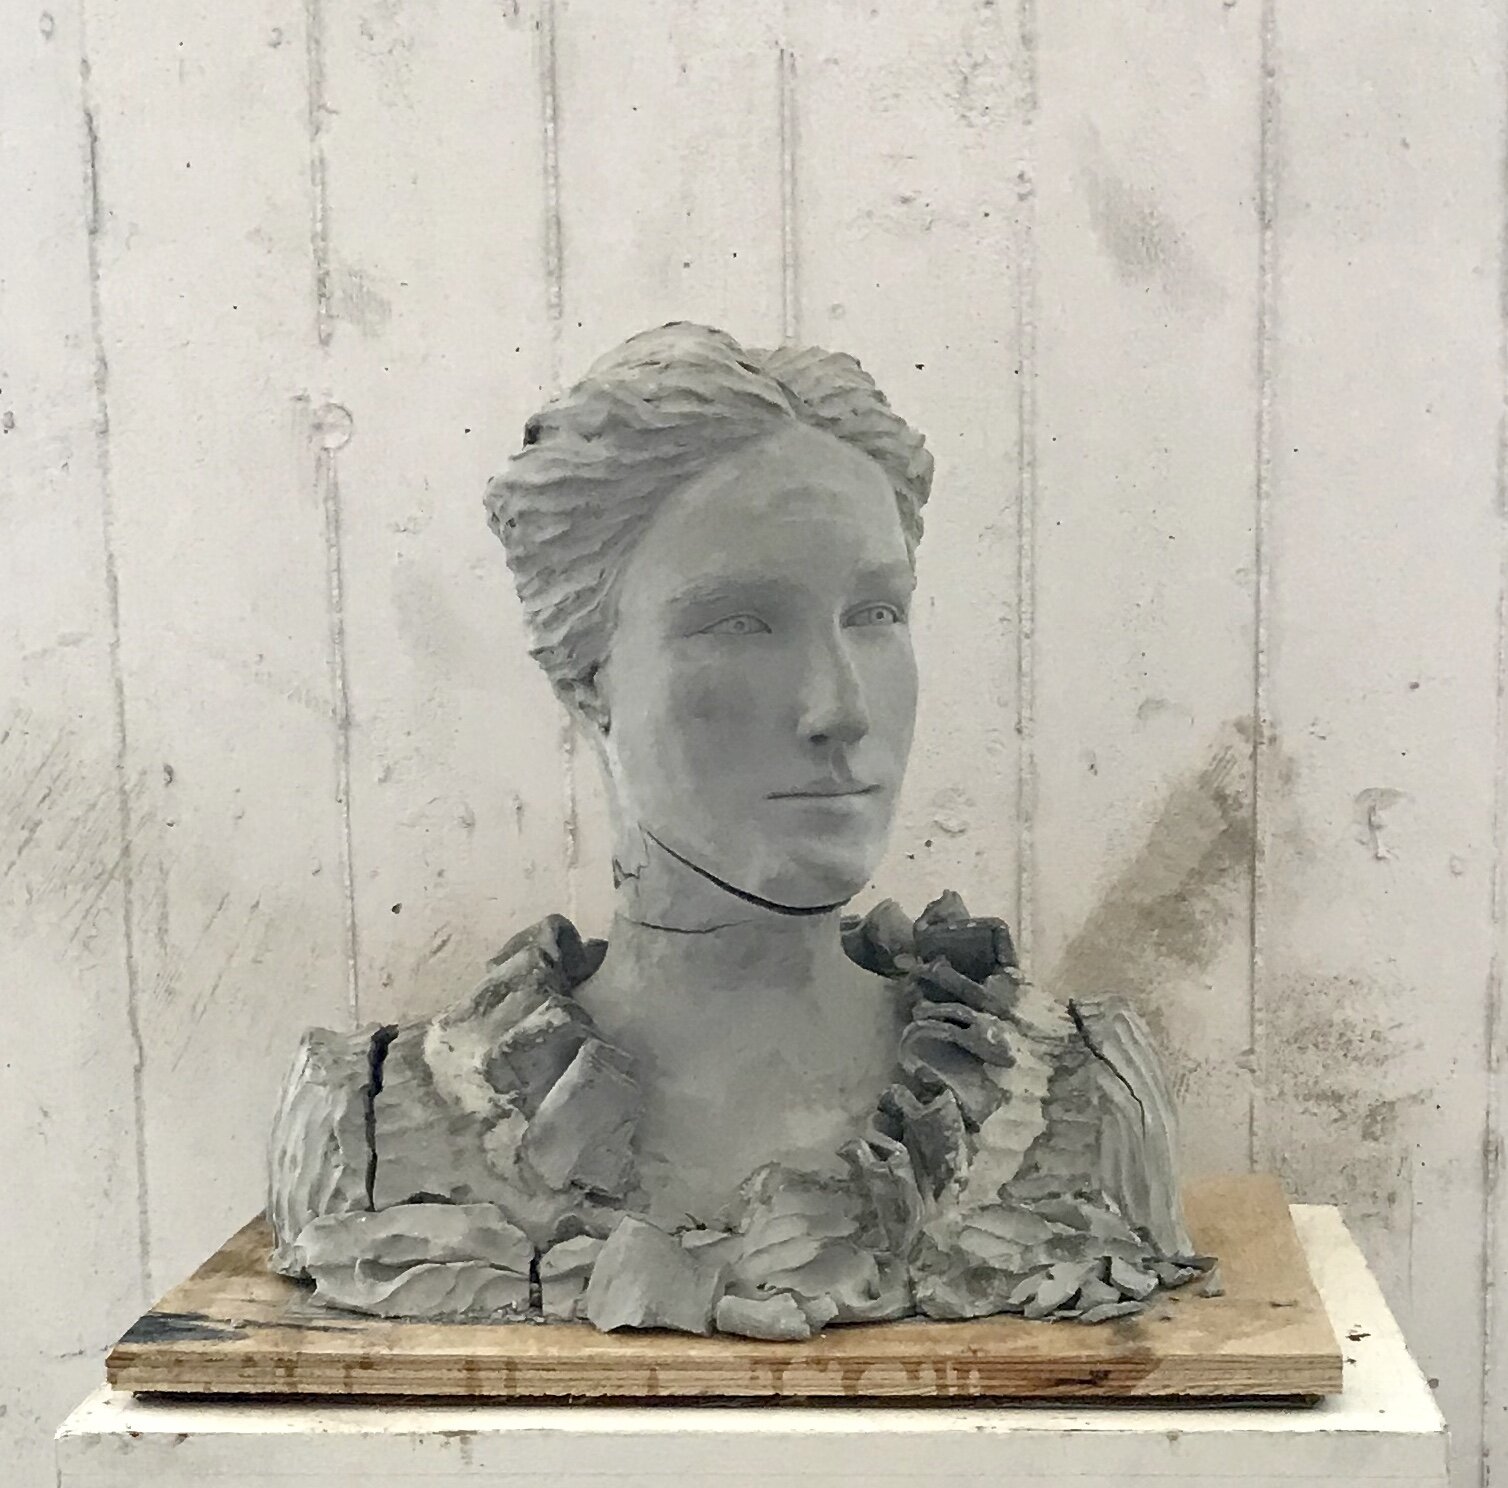  Mother Mold (Victoria Woodhull)  clay negative mold, 2019  [Detail of installation included in “Kara Walker presents: The Colossus of Rutgers”, Brooklyn Army Terminal, 2019] 